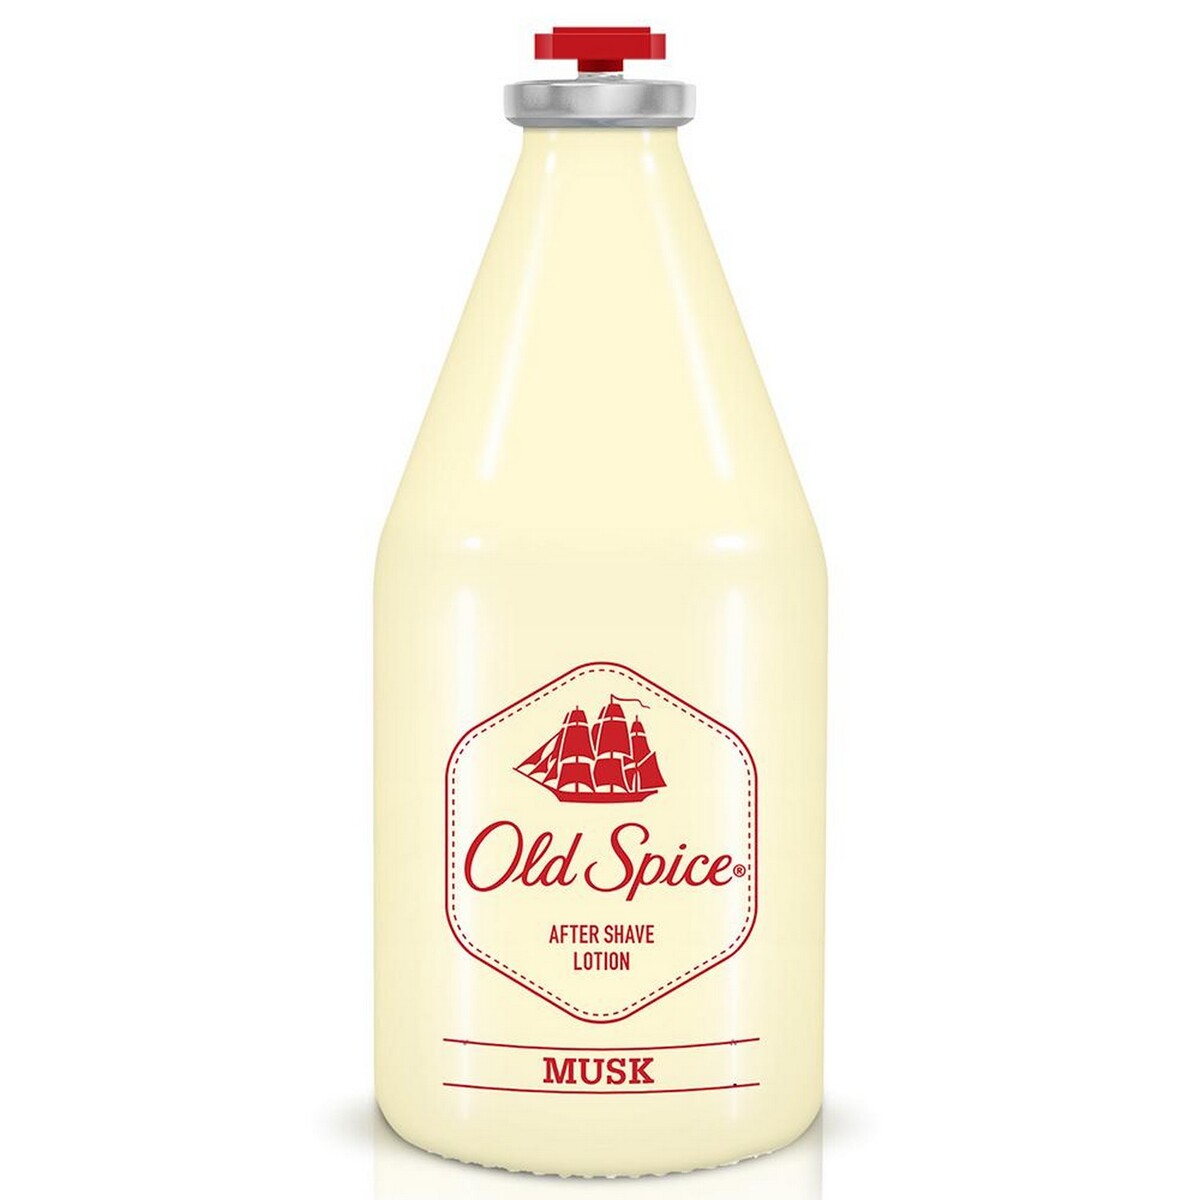 Old Spice After Shave Lotion Musk 50ml